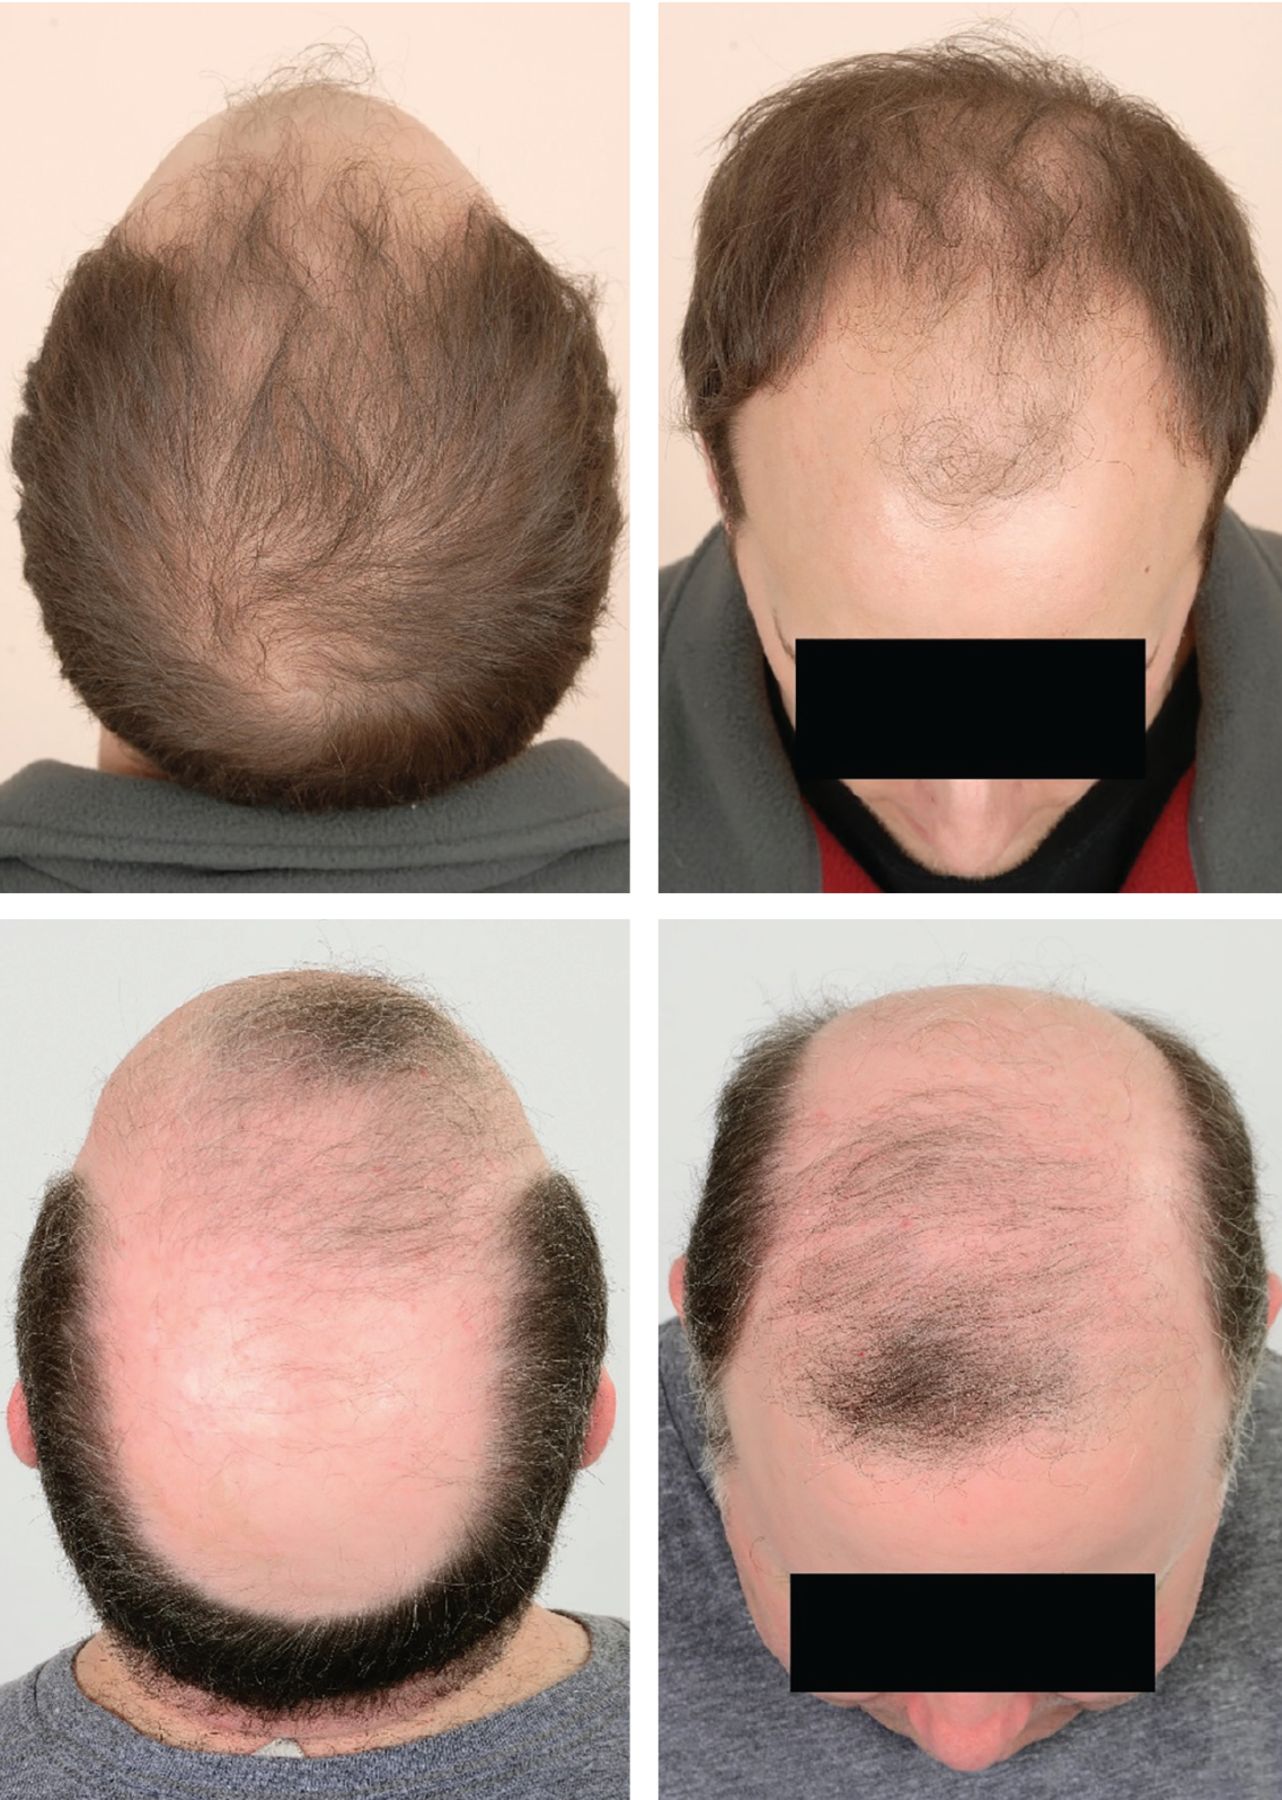 Is Your Hair Thinning? Try These 5 Classic Men's Hairstyles! | Gentleman's  Gazette